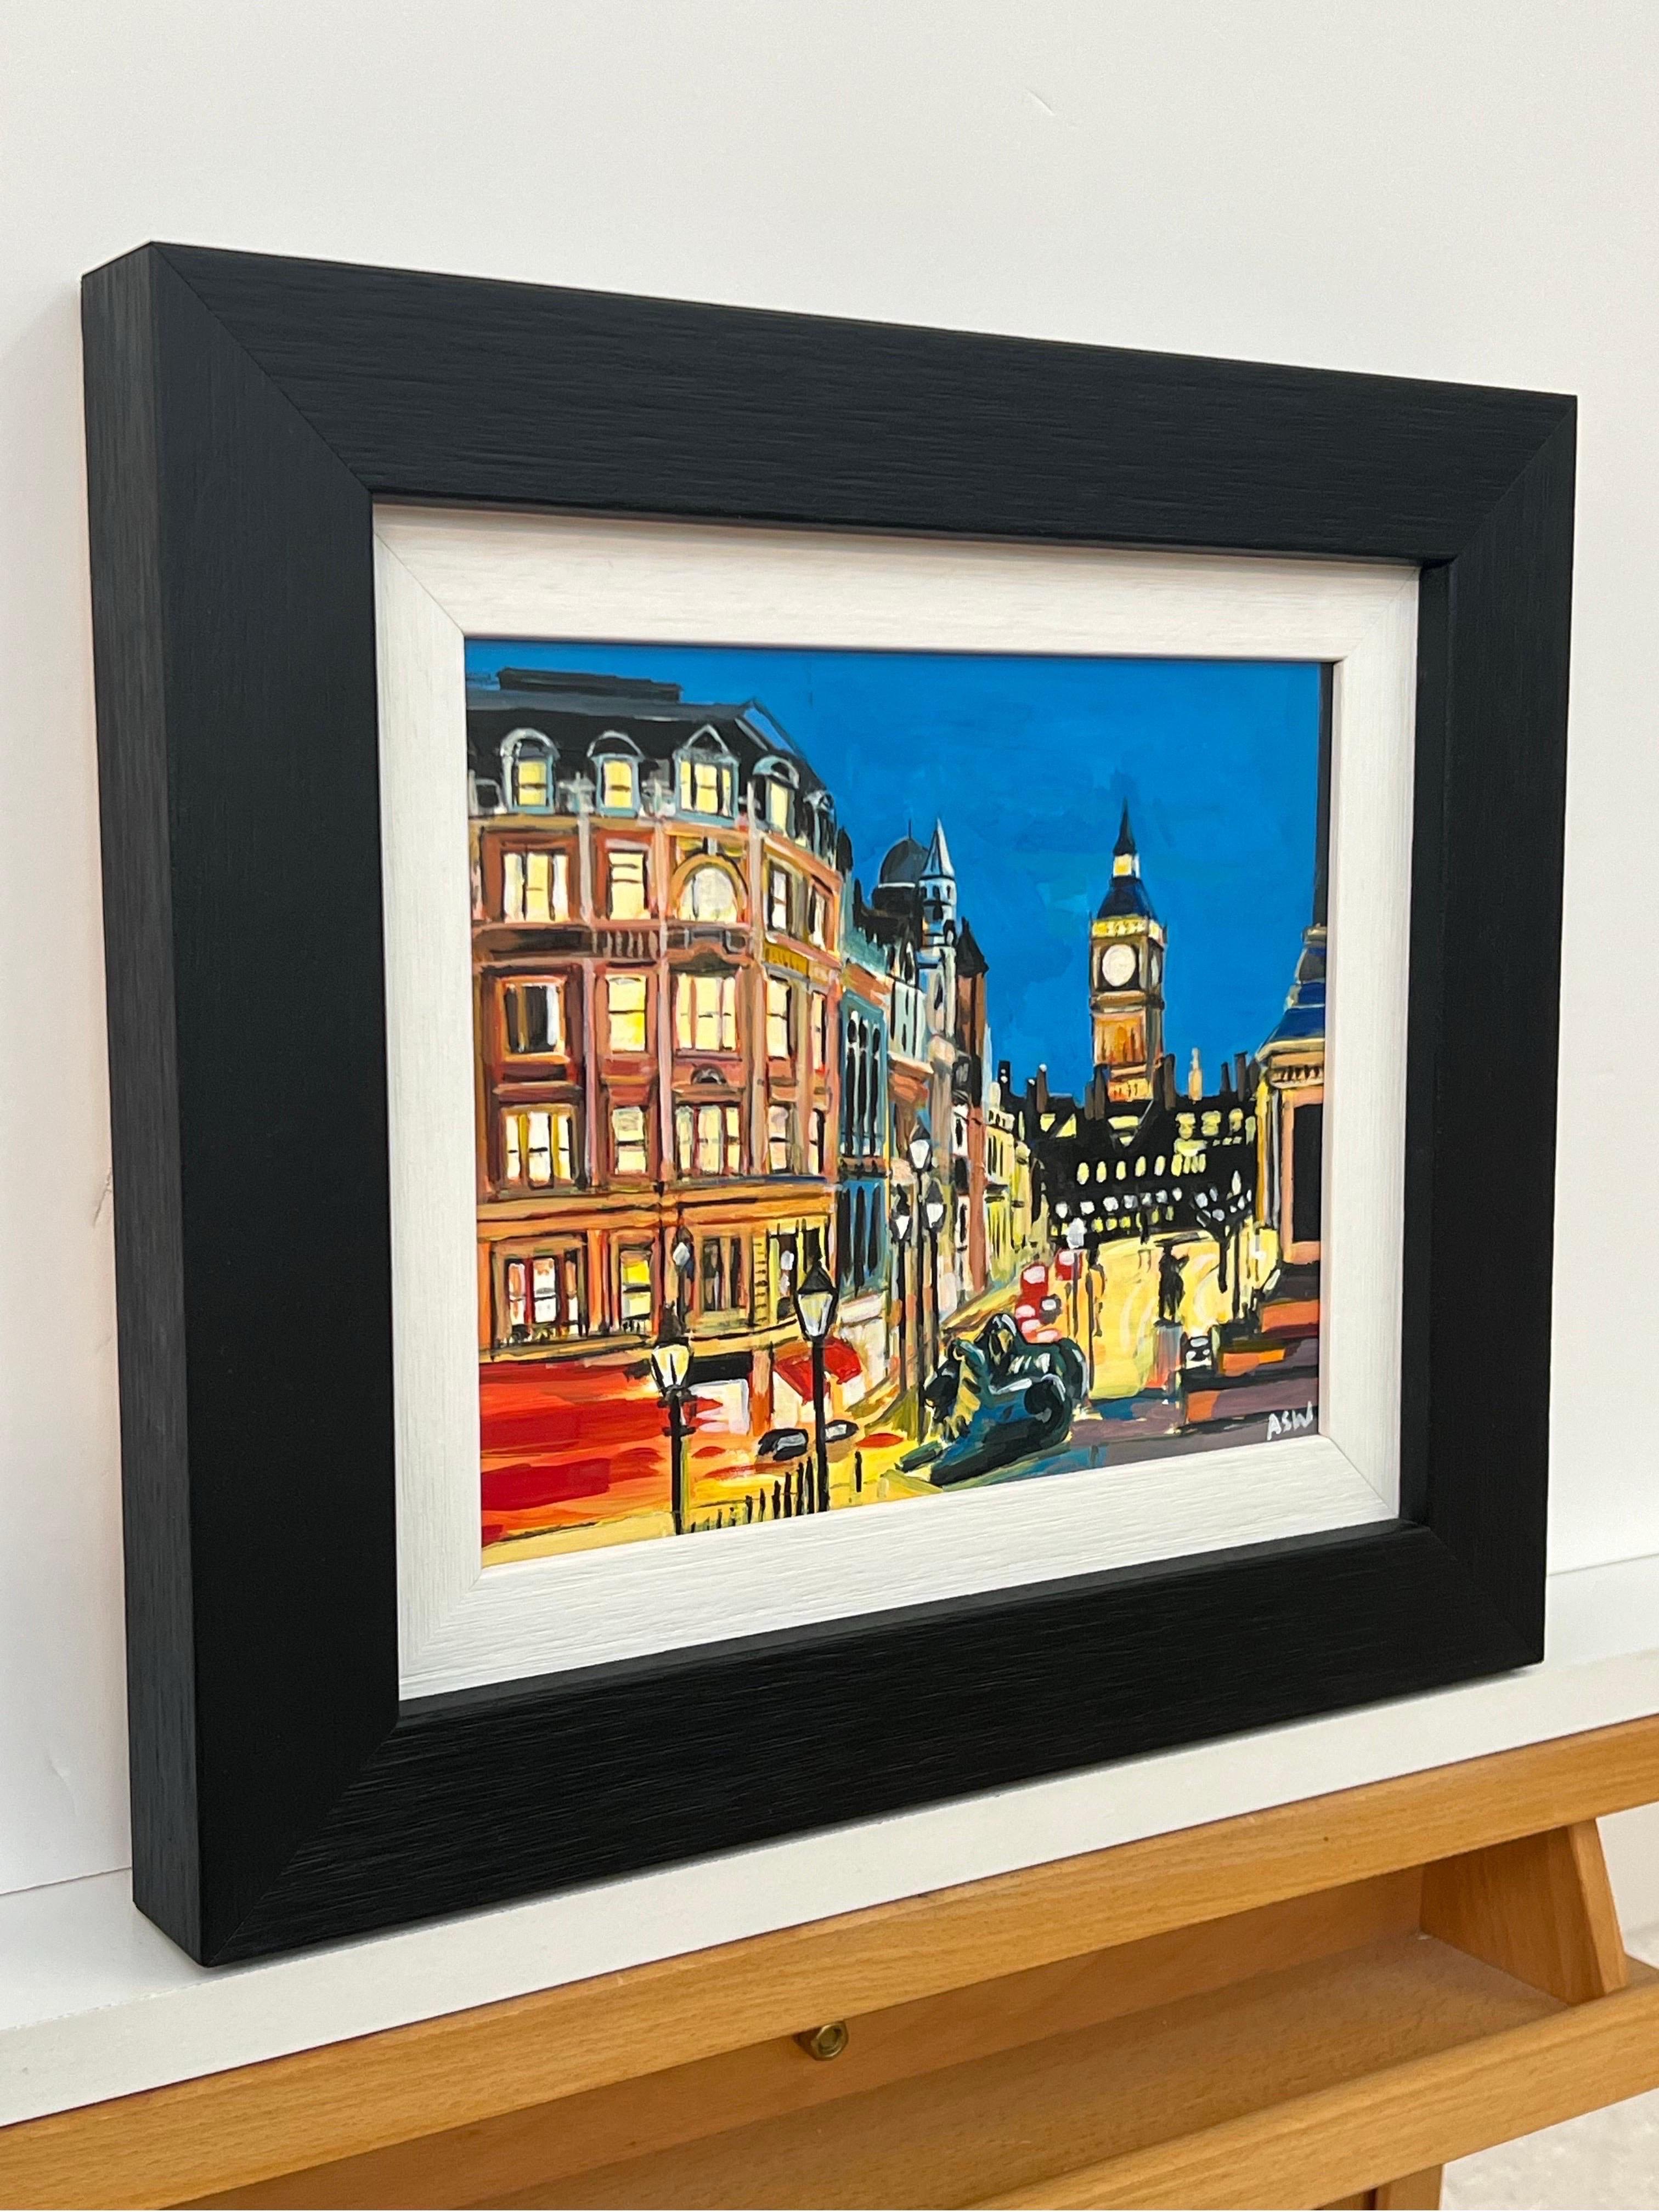 Big Ben from Trafalgar Square in London a Miniature Study by Contemporary Artist - Painting by Angela Wakefield